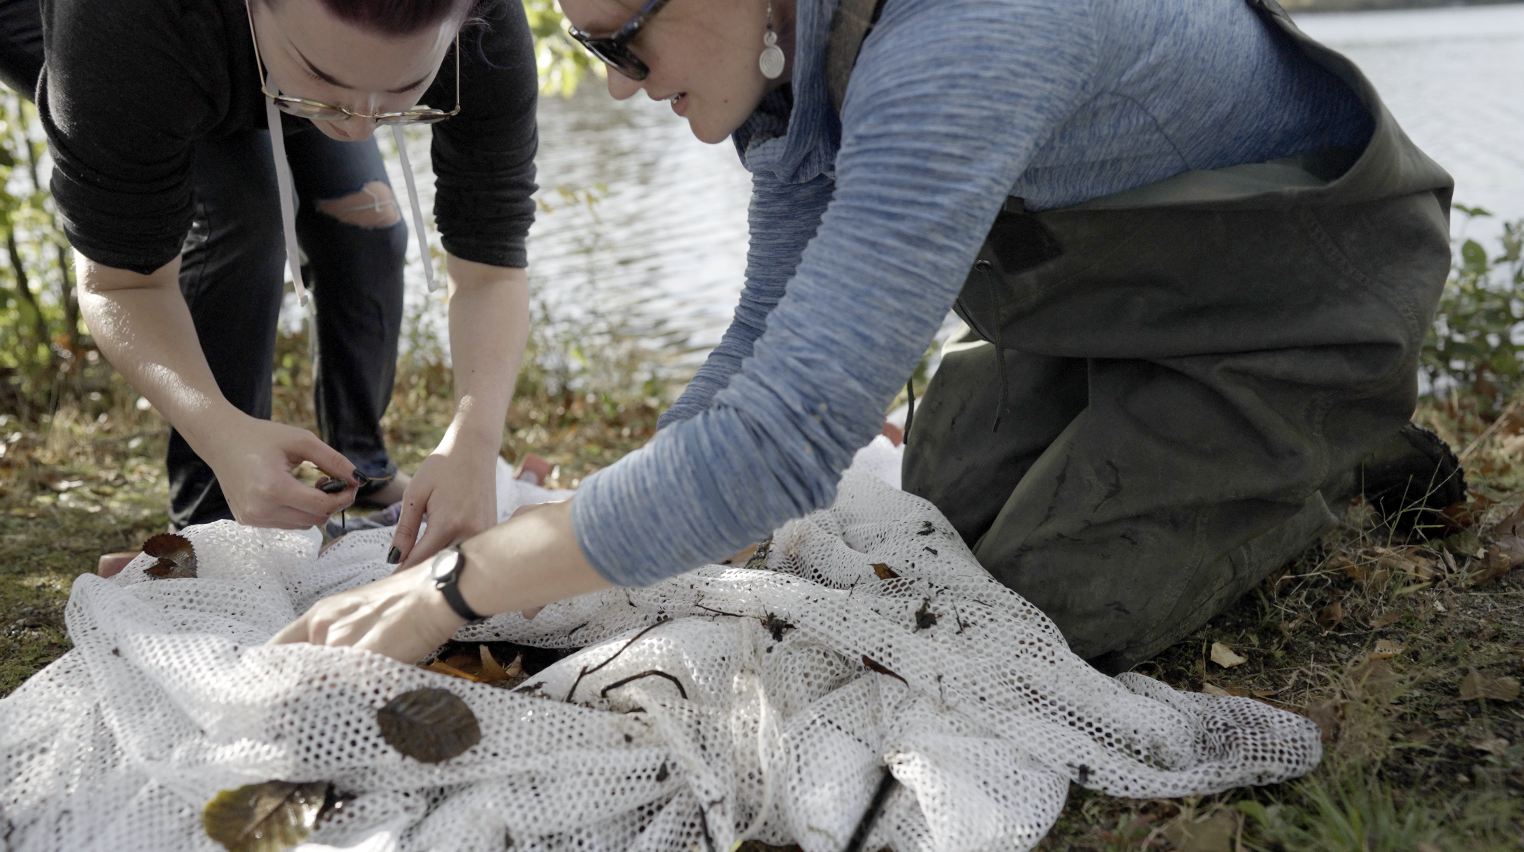 Worcester state students studying a net full of organisms from a body of water